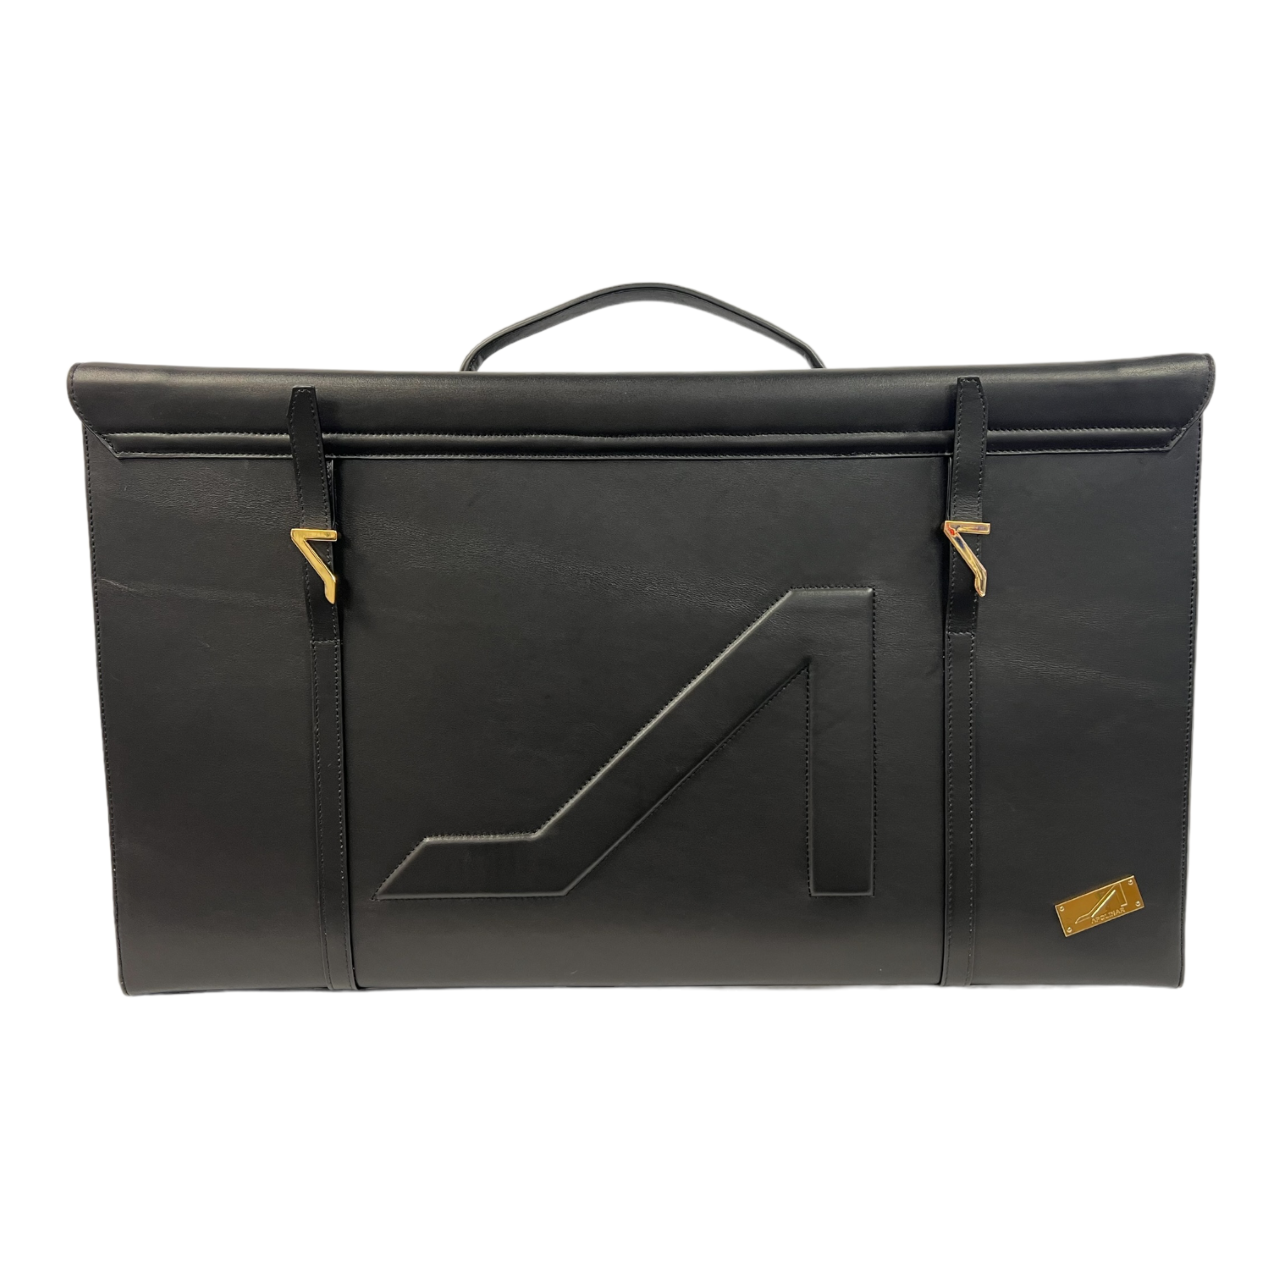 APOLINAR OVERSIZED LEATHER TRUNK